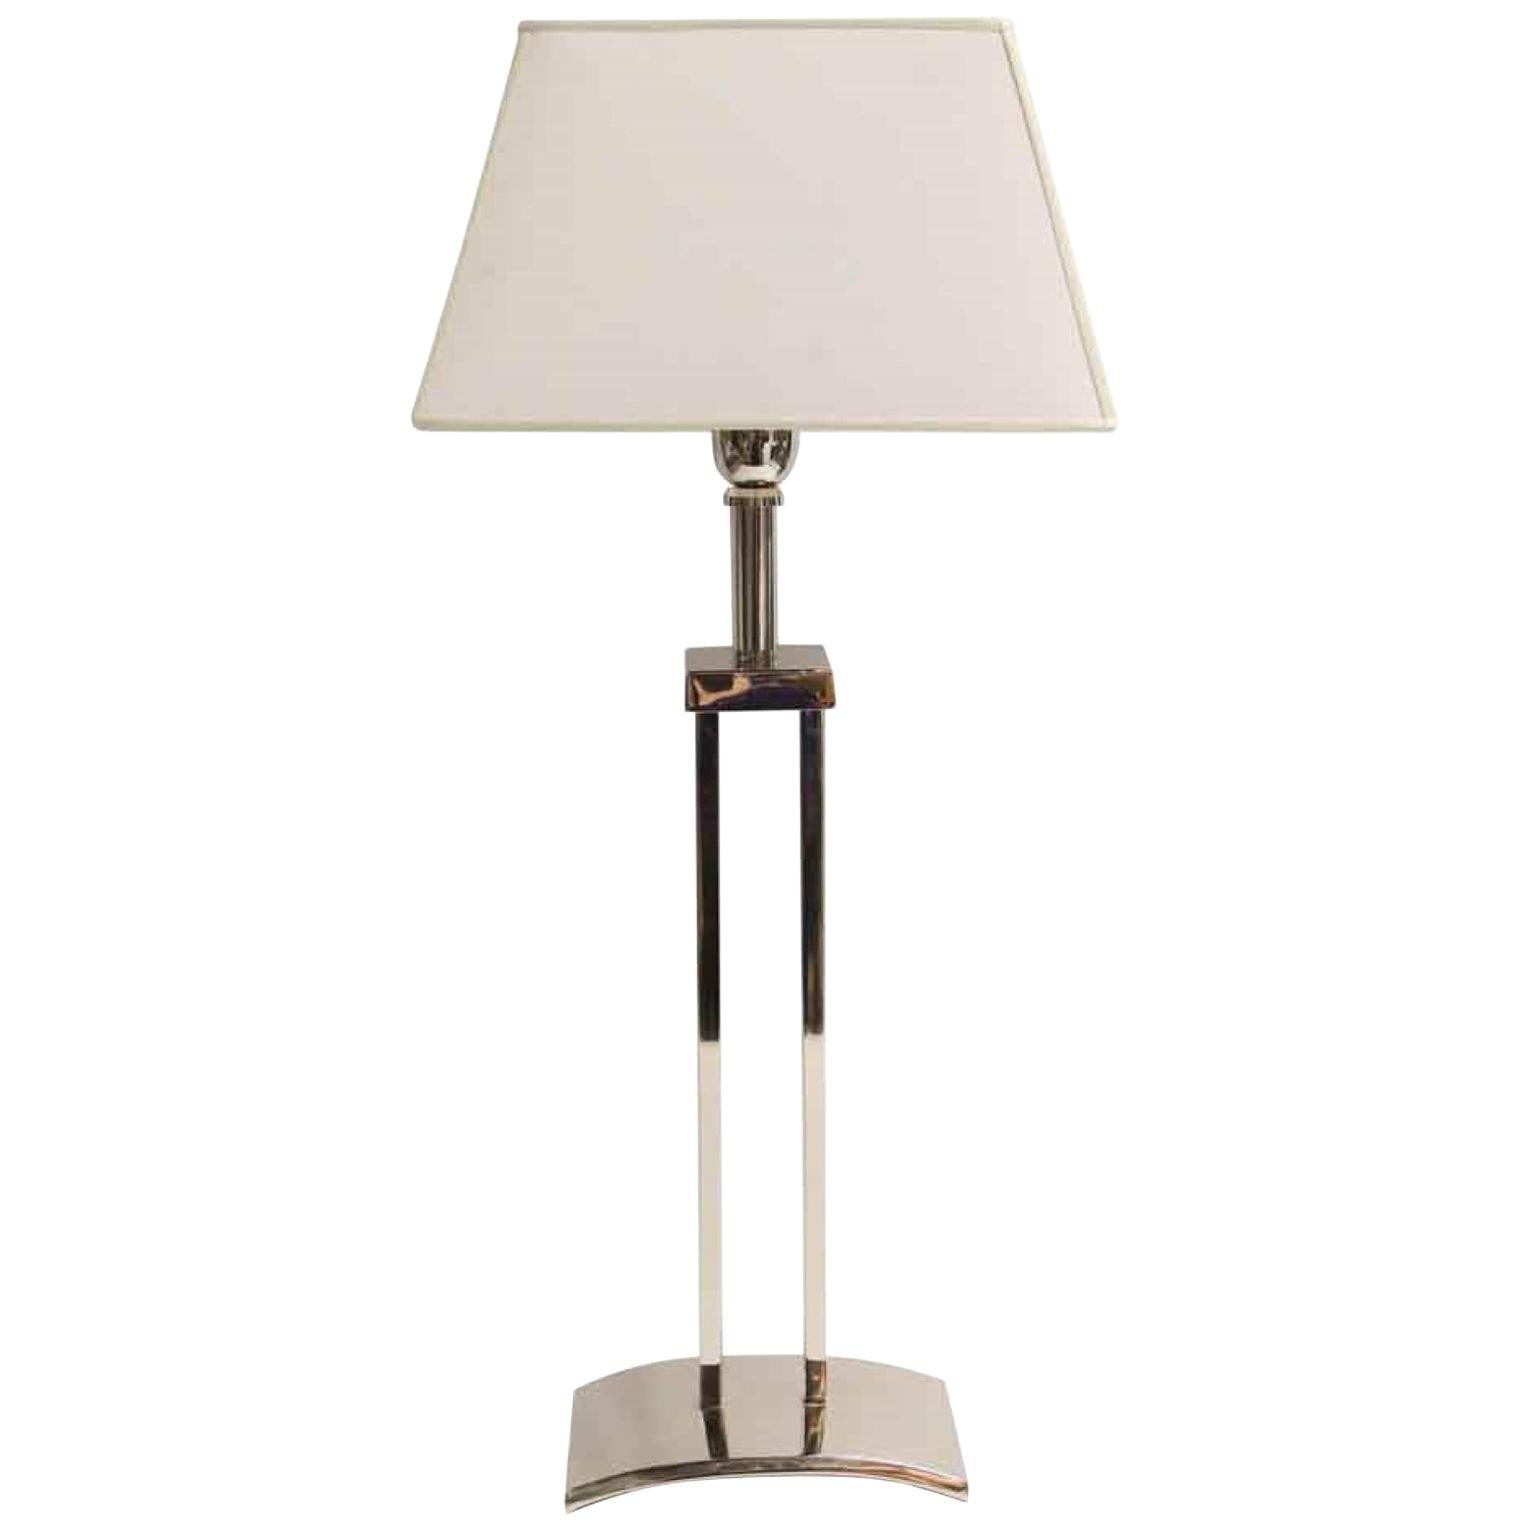 Mid-Century Modern Style Chrome Table Lamp, Quantity Available